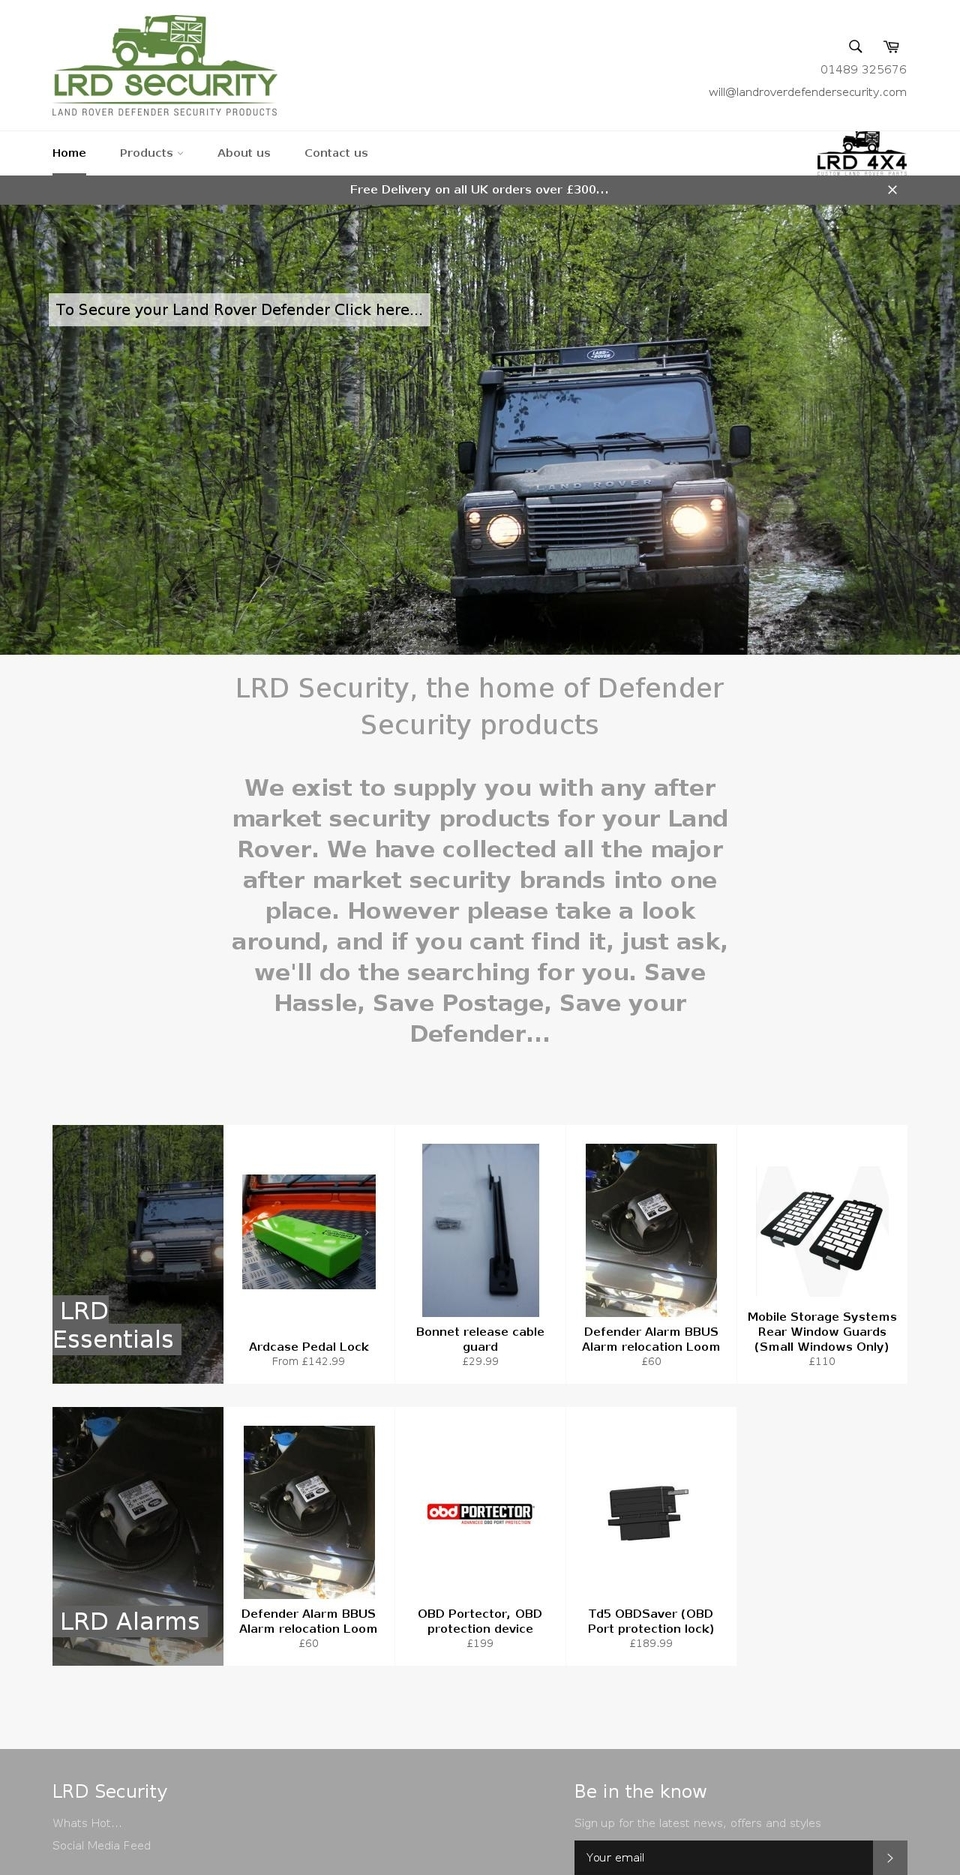 Ride Shopify theme site example landroverdefendersecurity.com